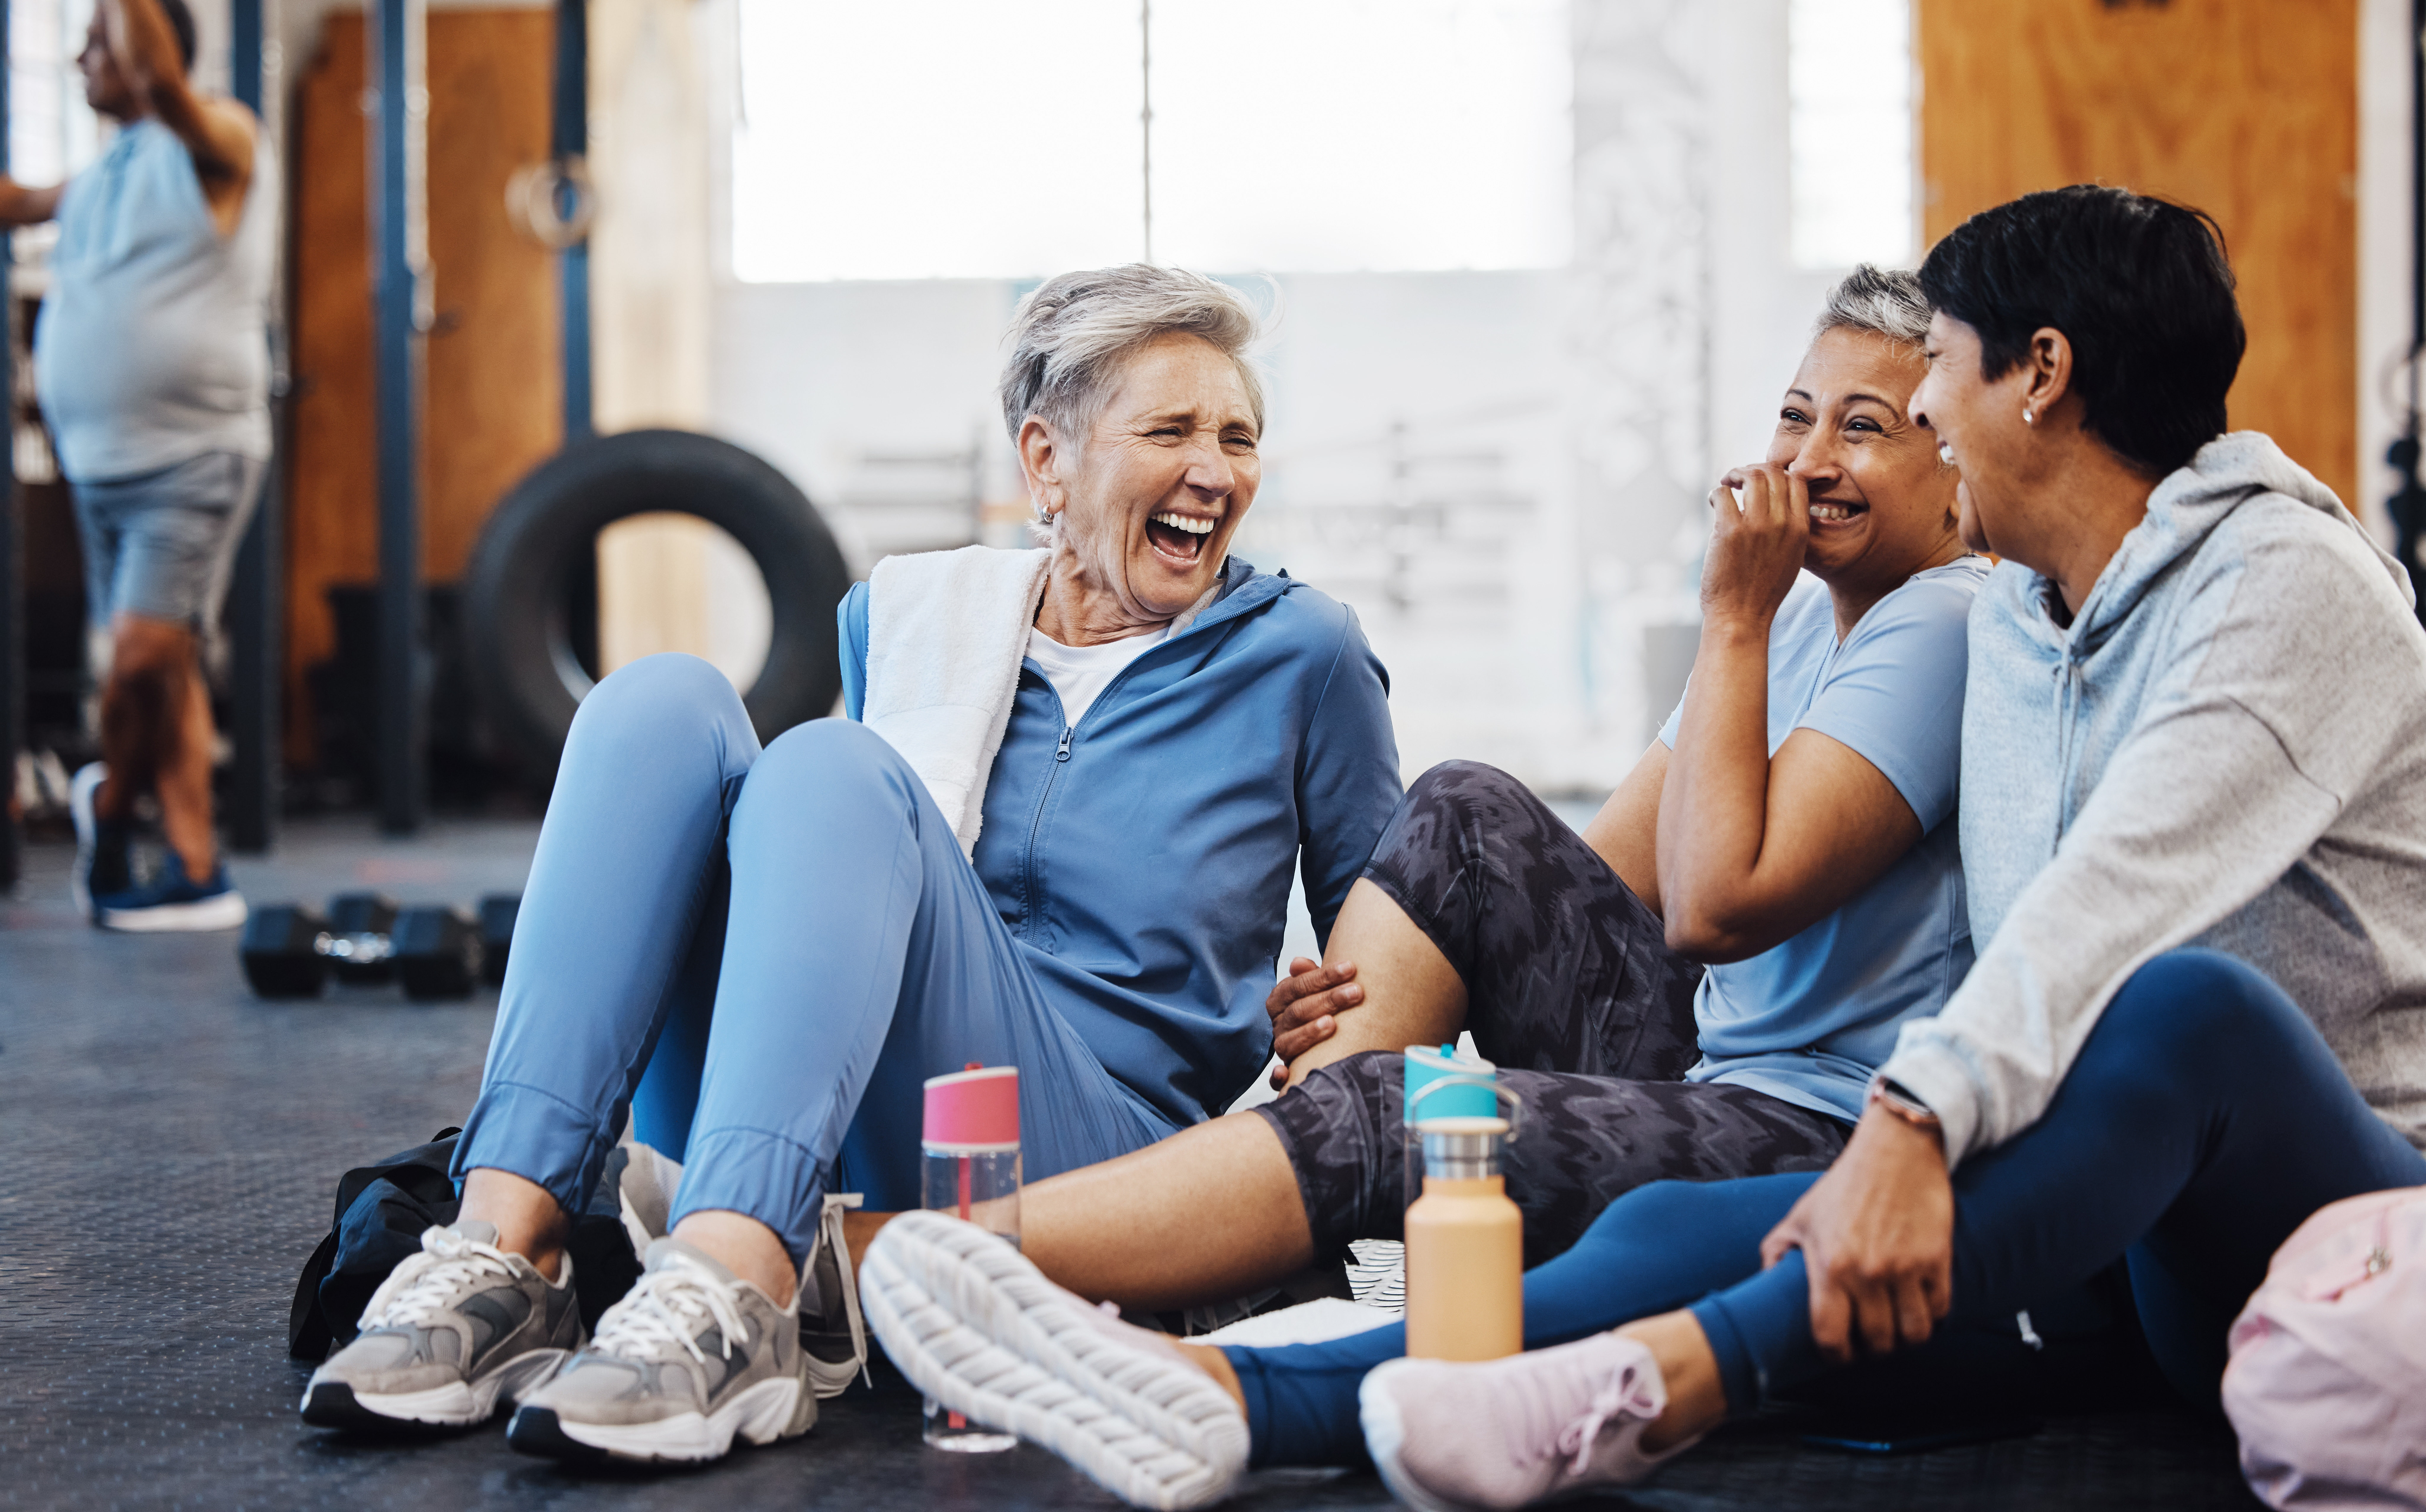 Three women in tracksuits at gym all laughing